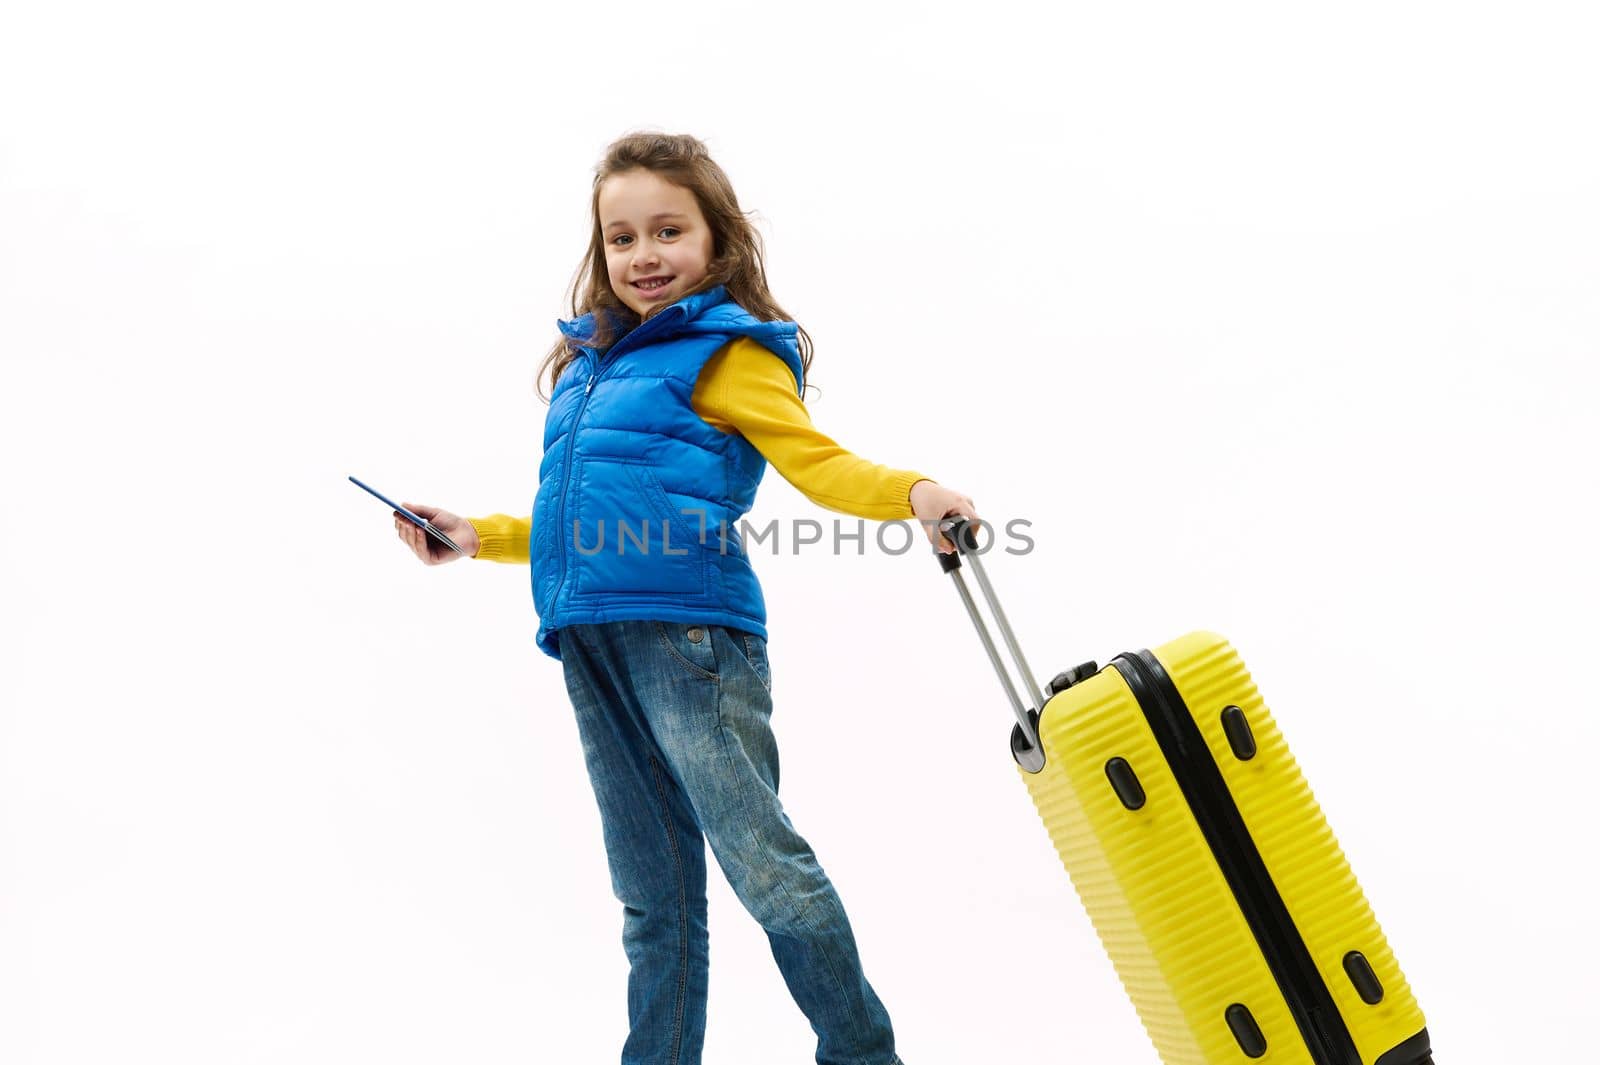 Stylish kid traveler girl in blue jeans, yellow shirt and down jacket, with suitcase and boarding pass, traveling abroad by artgf